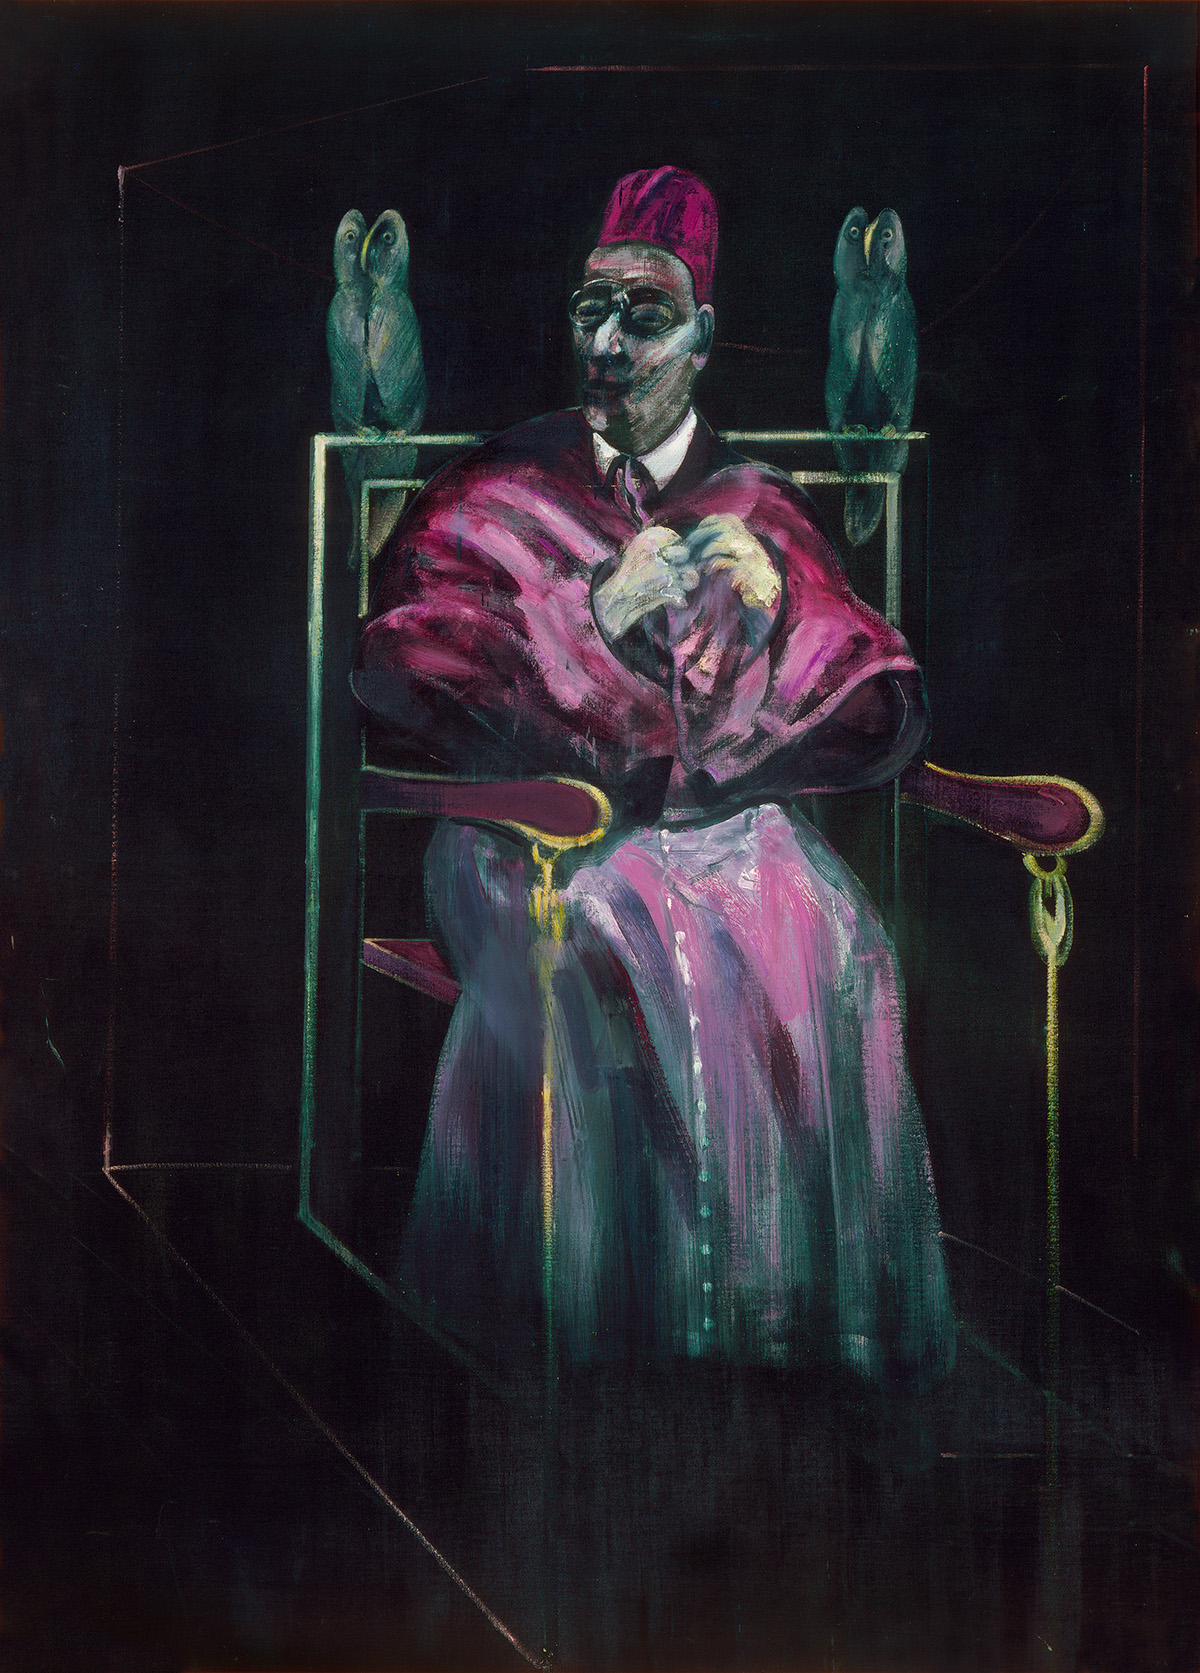 Francis Bacon, Painting, 1958. Oil on canvas. CR number 58-02. © The Estate of Francis Bacon / DACS London 2020. All rights reserved.